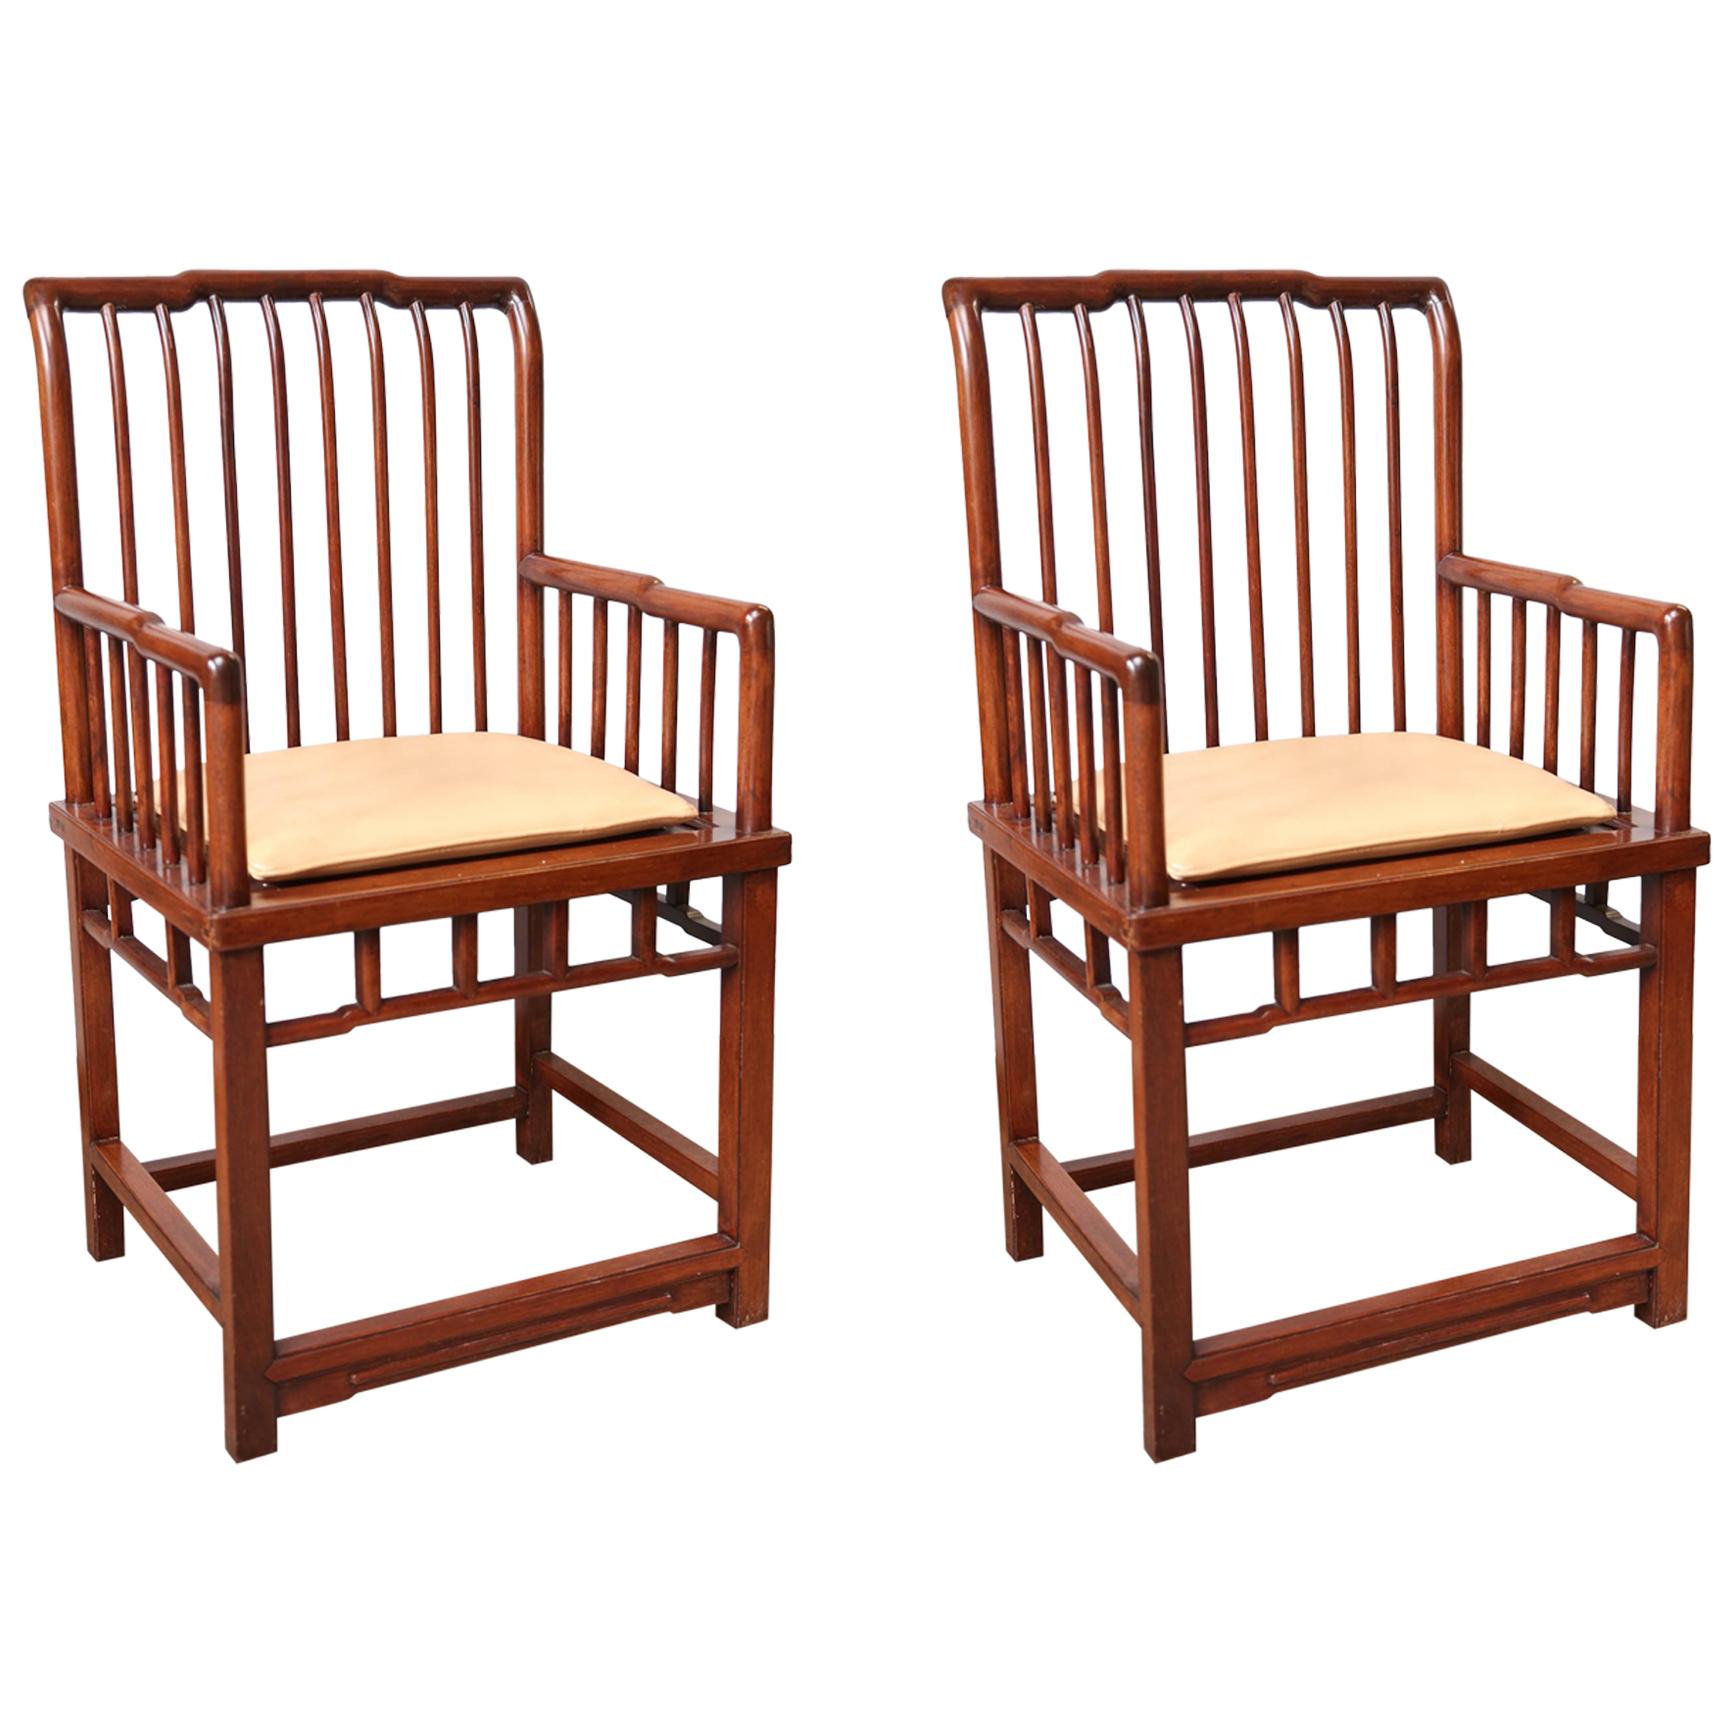 Pair of Chinese Southern Official's Armchairs